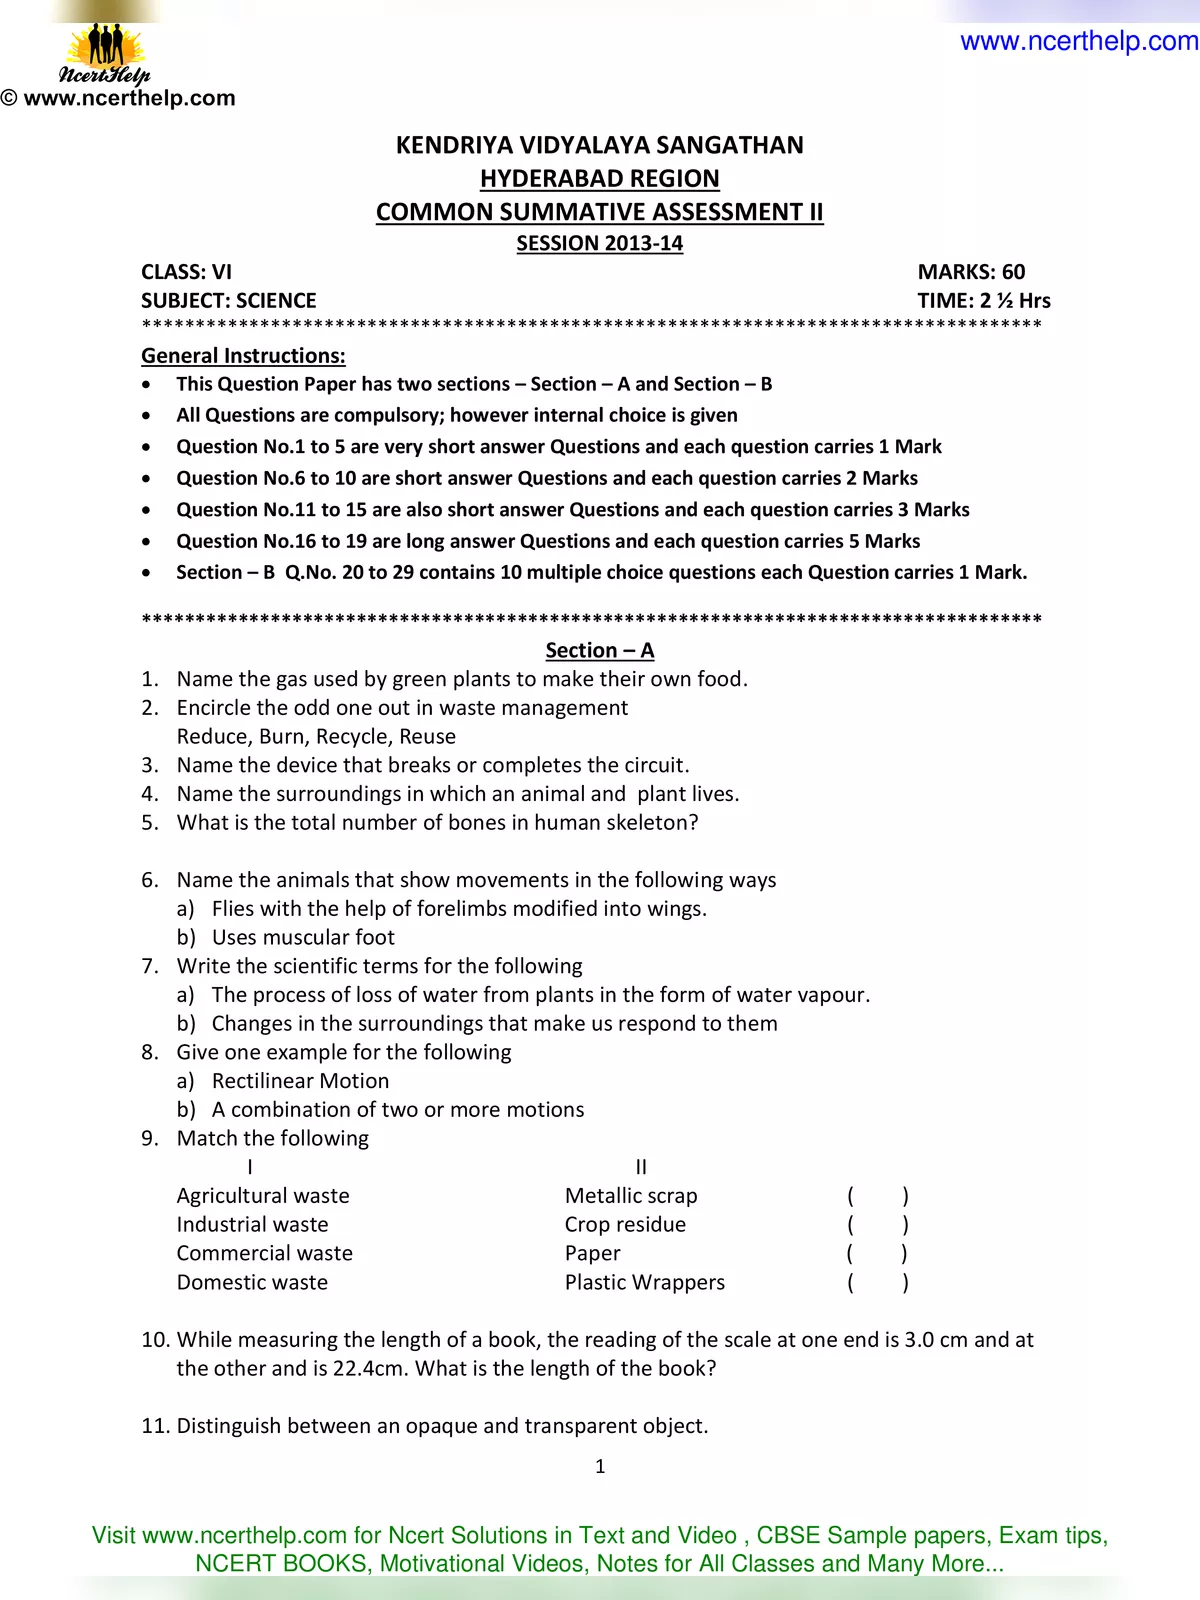 Class 6 Science Question Paper 2022